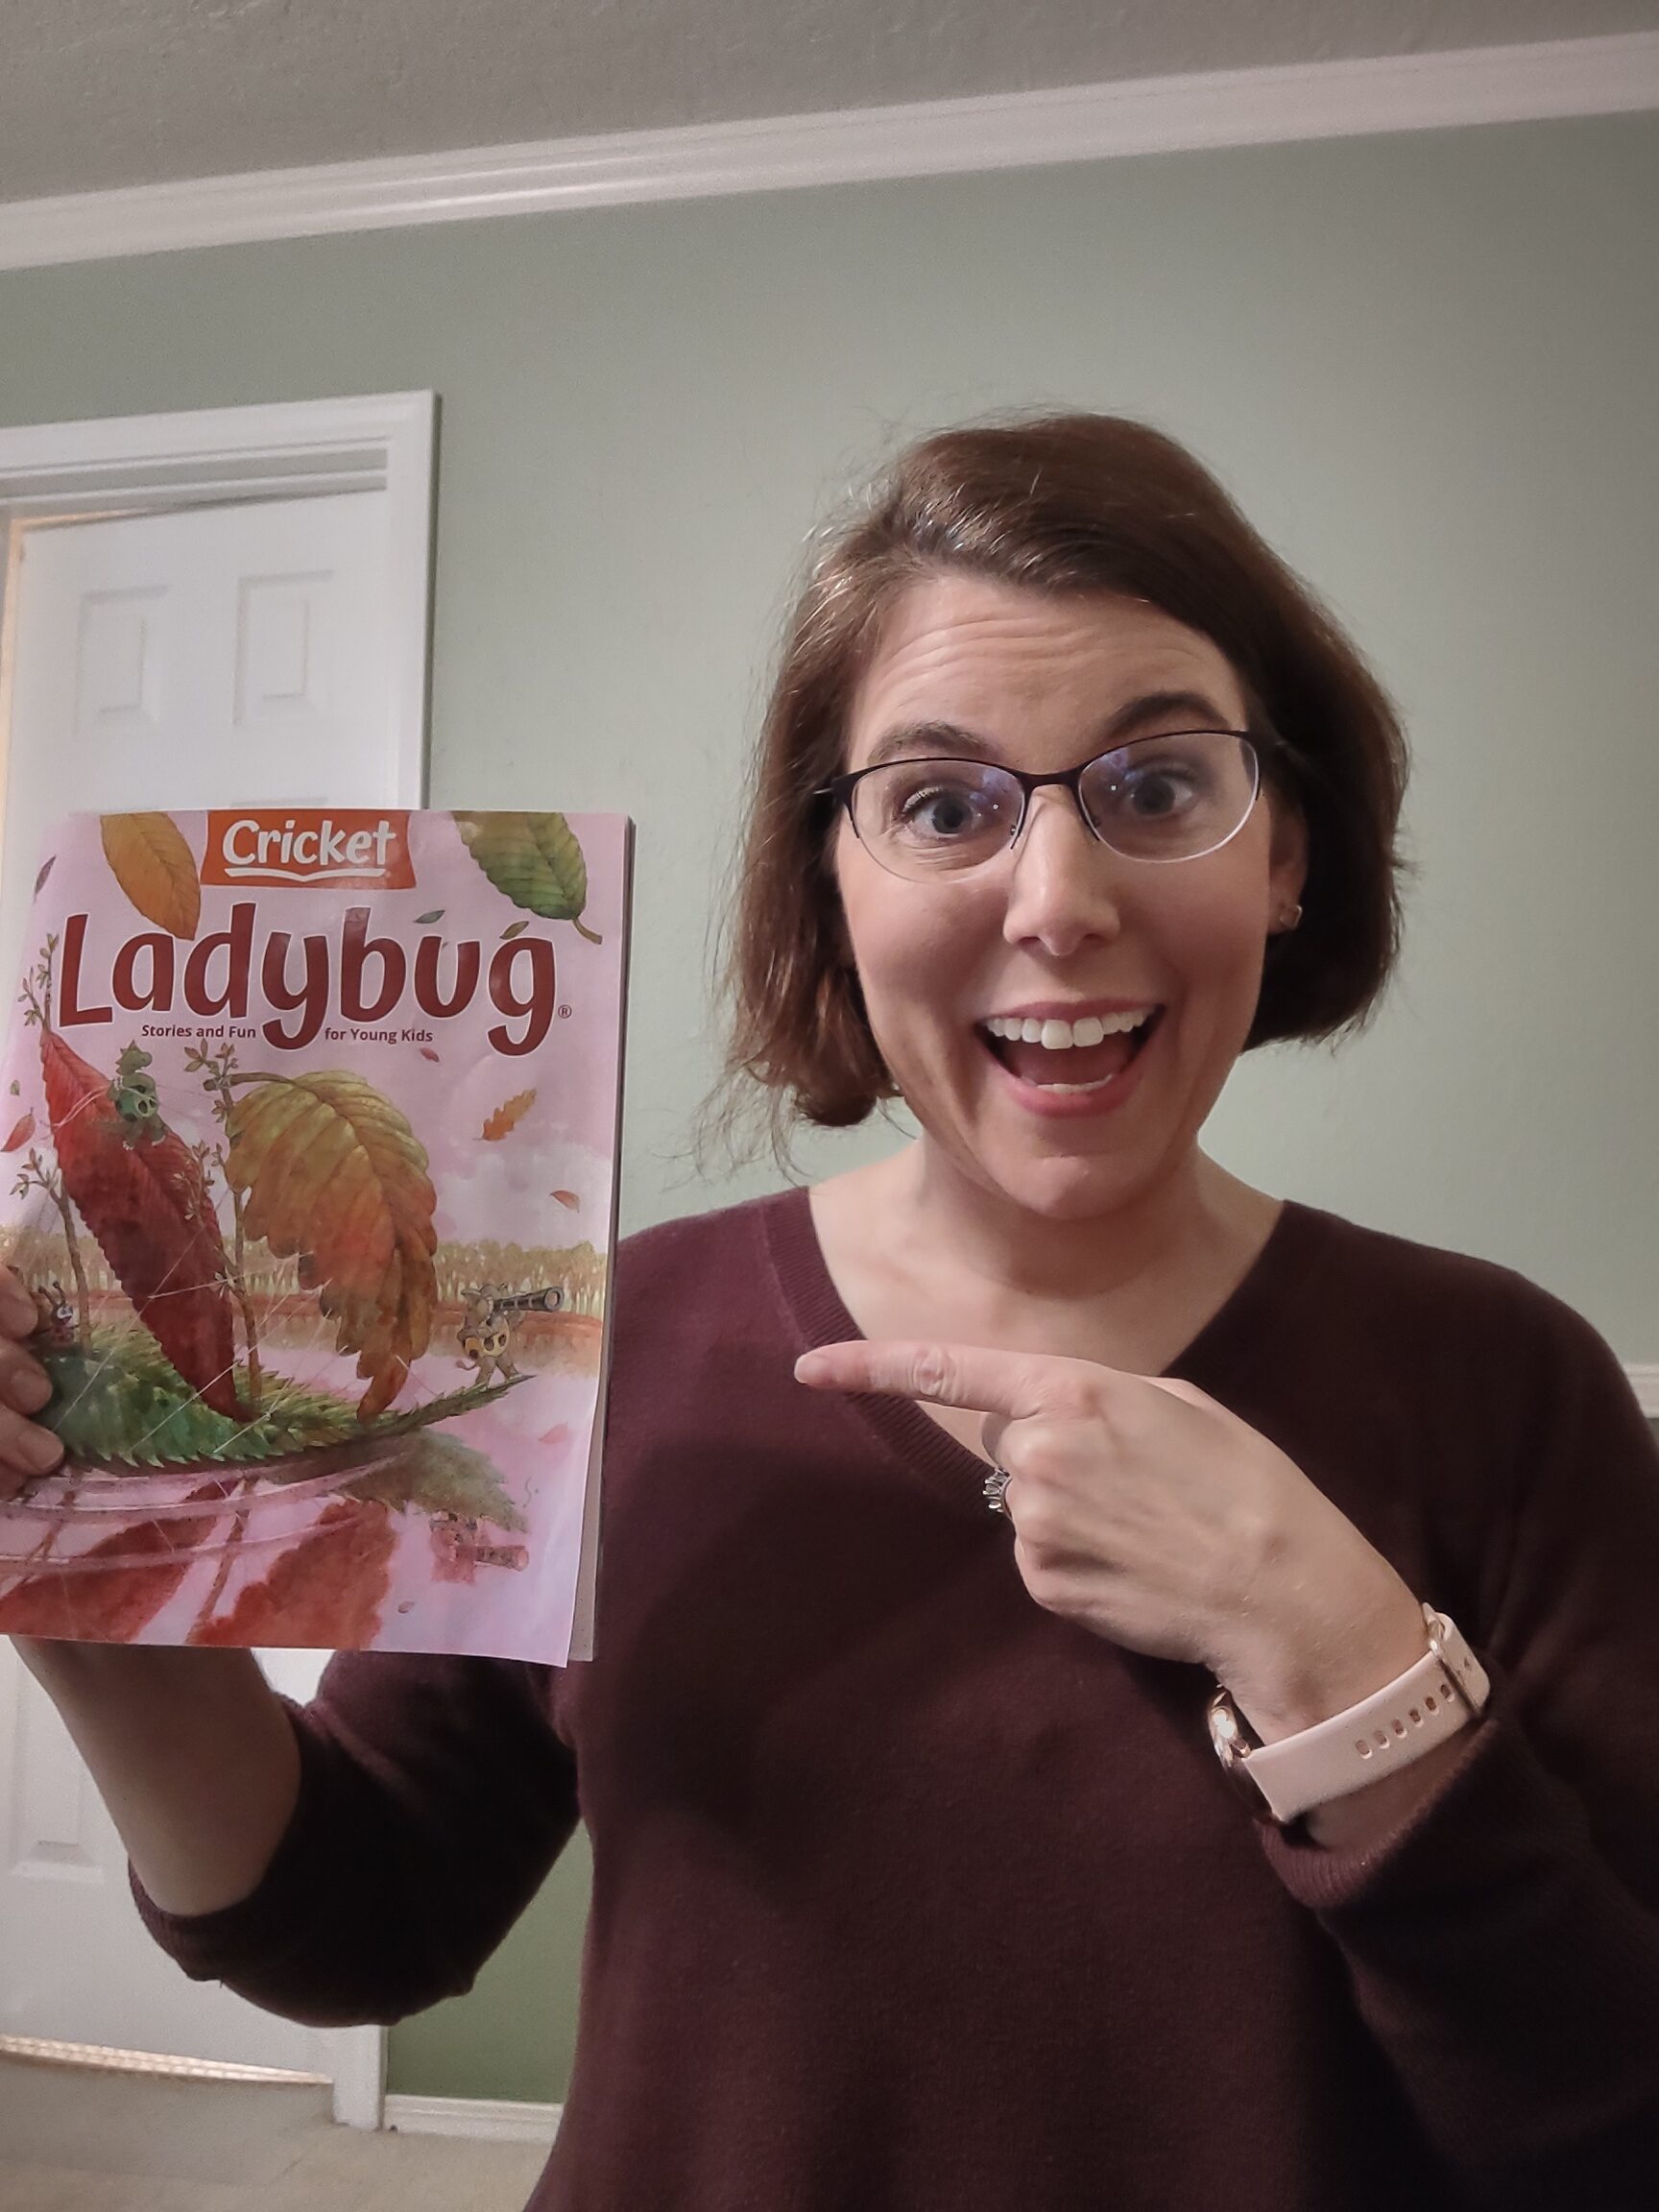 Susan, a white woman with short brown hair and glasses, holds up a copy of Ladybug Magazine and points at it with a wide smile.